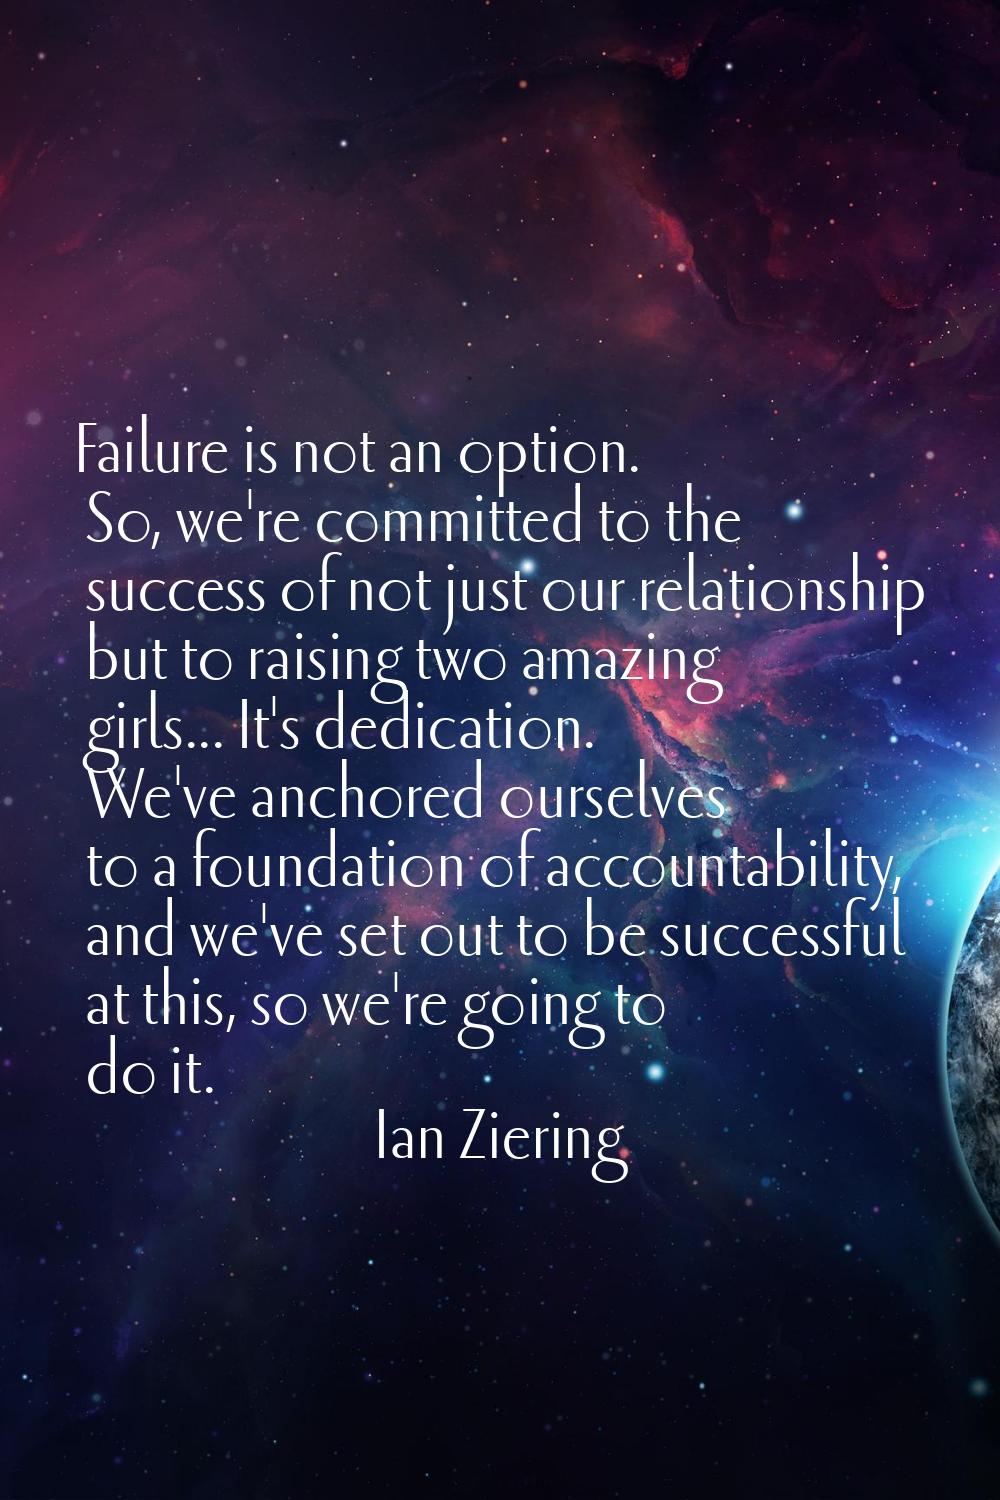 Failure is not an option. So, we're committed to the success of not just our relationship but to ra